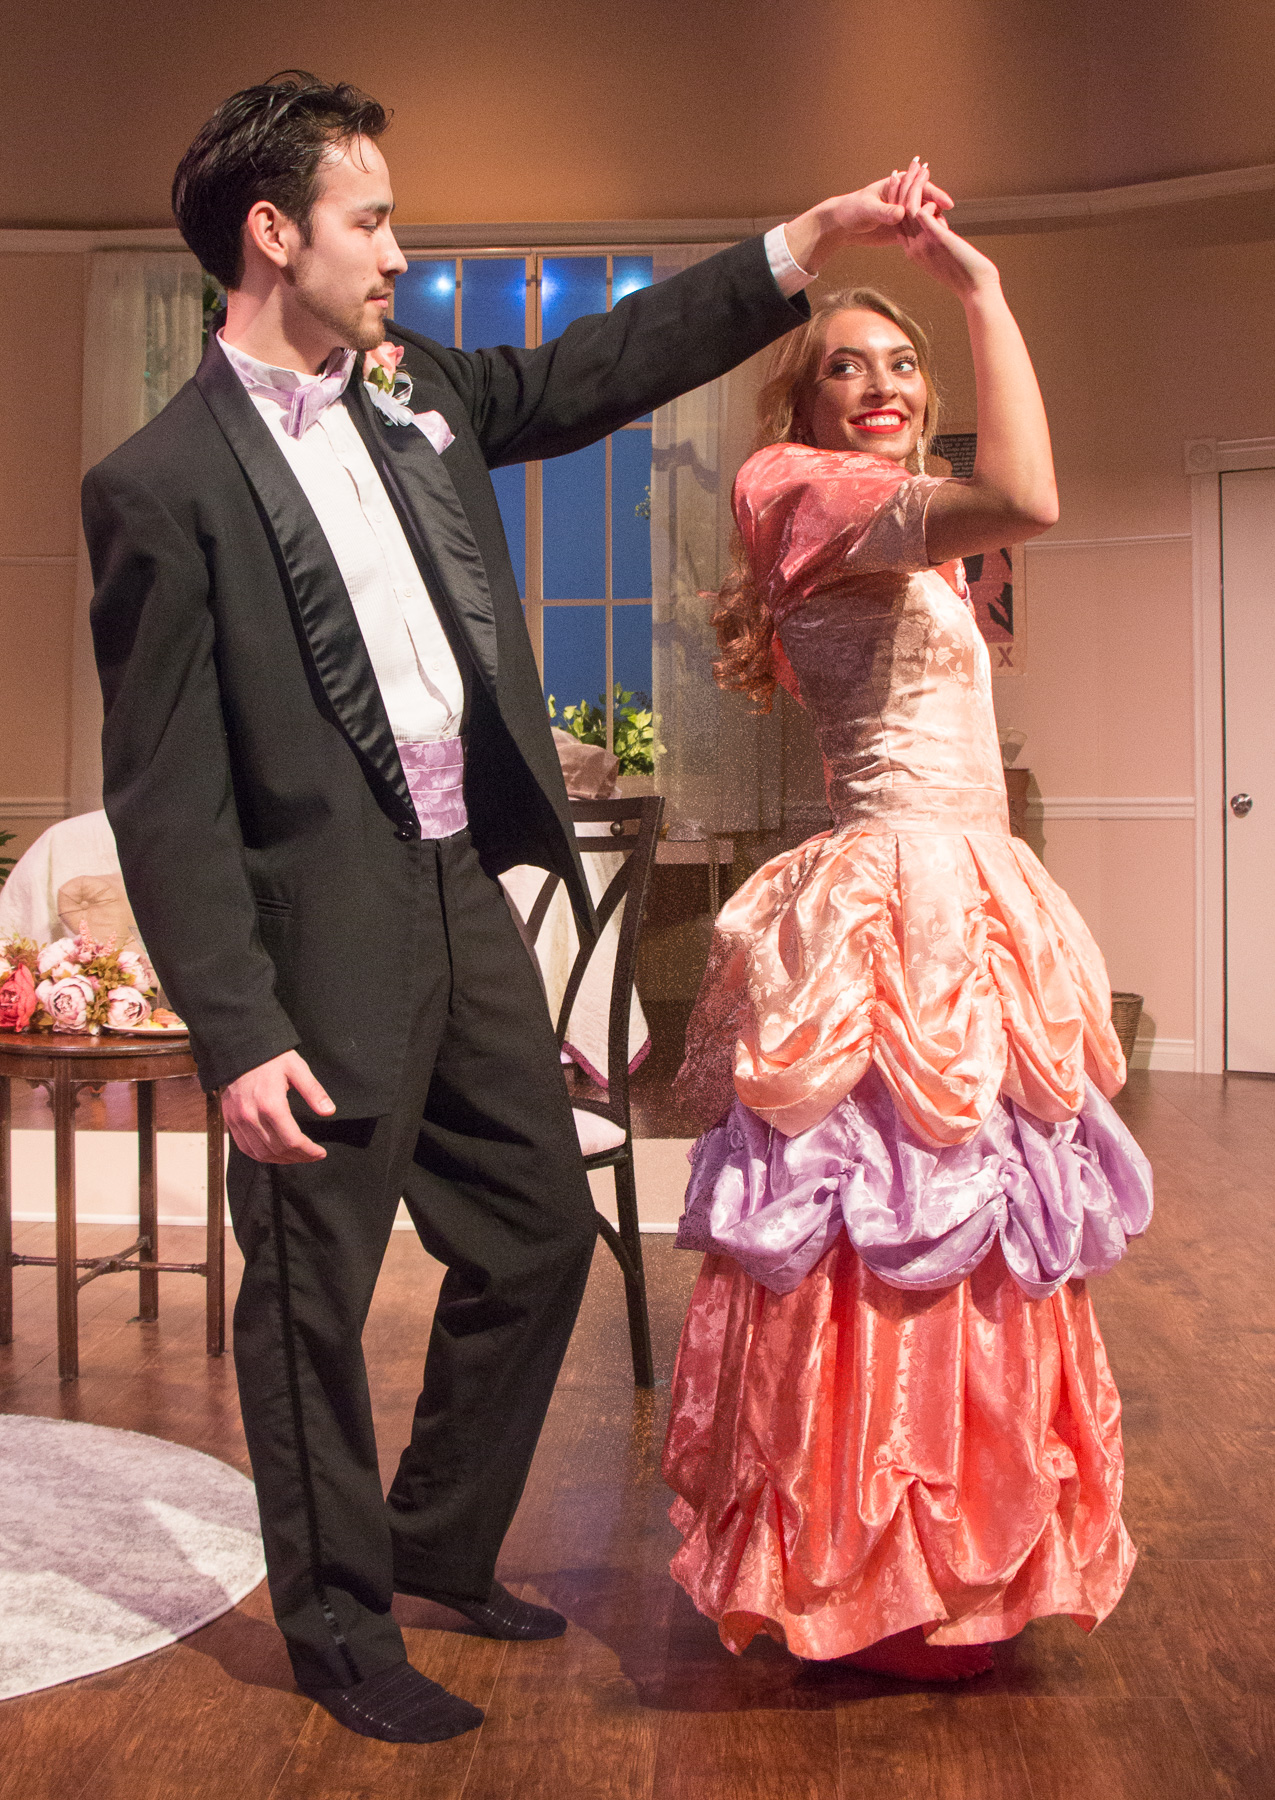 An image from the production of 'Five Women Wearing the Same Dress' featuring Jared Olin, Meghan Fowler.